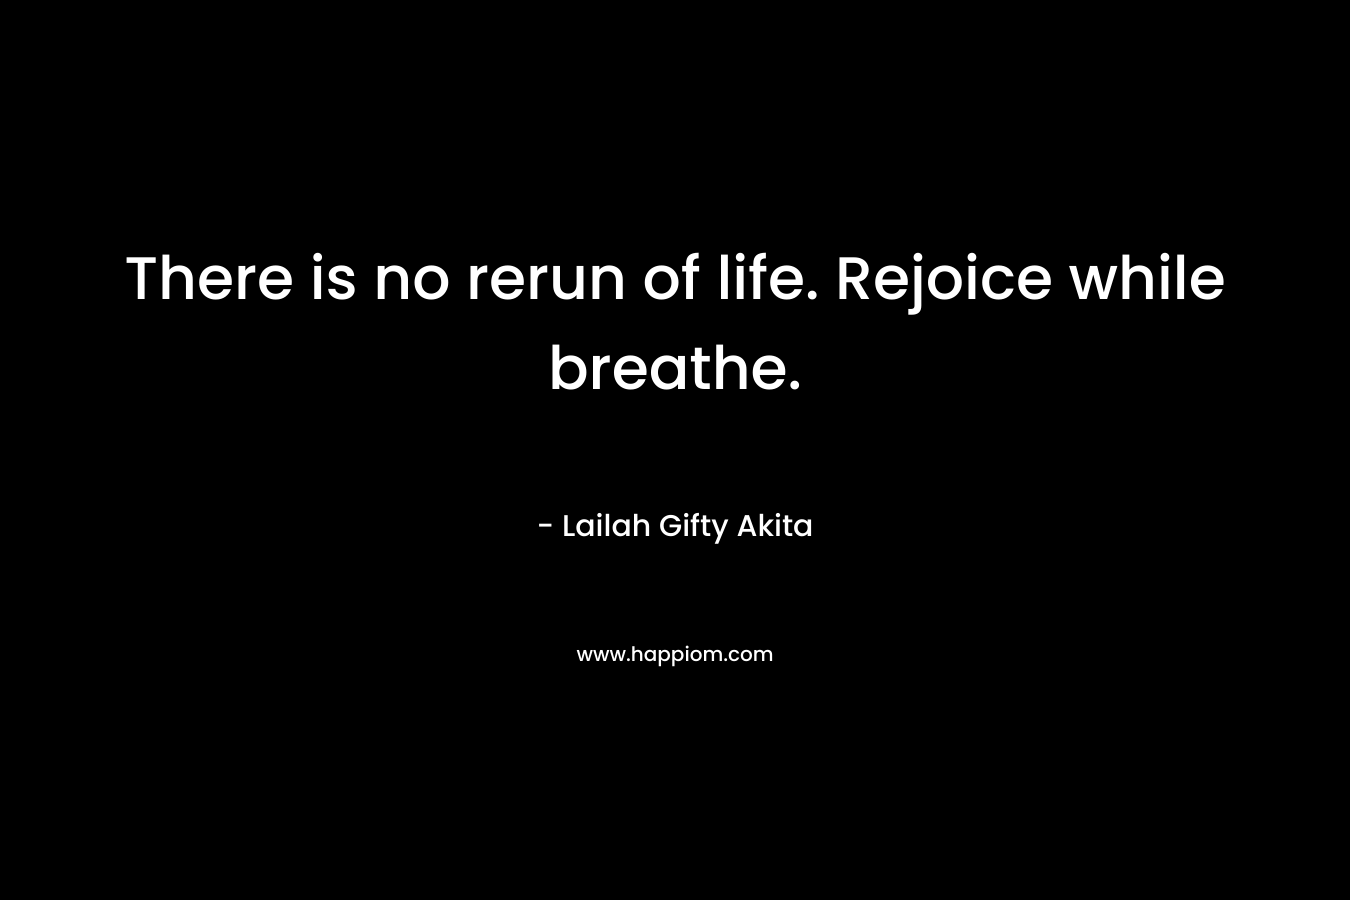 There is no rerun of life. Rejoice while breathe. – Lailah Gifty Akita